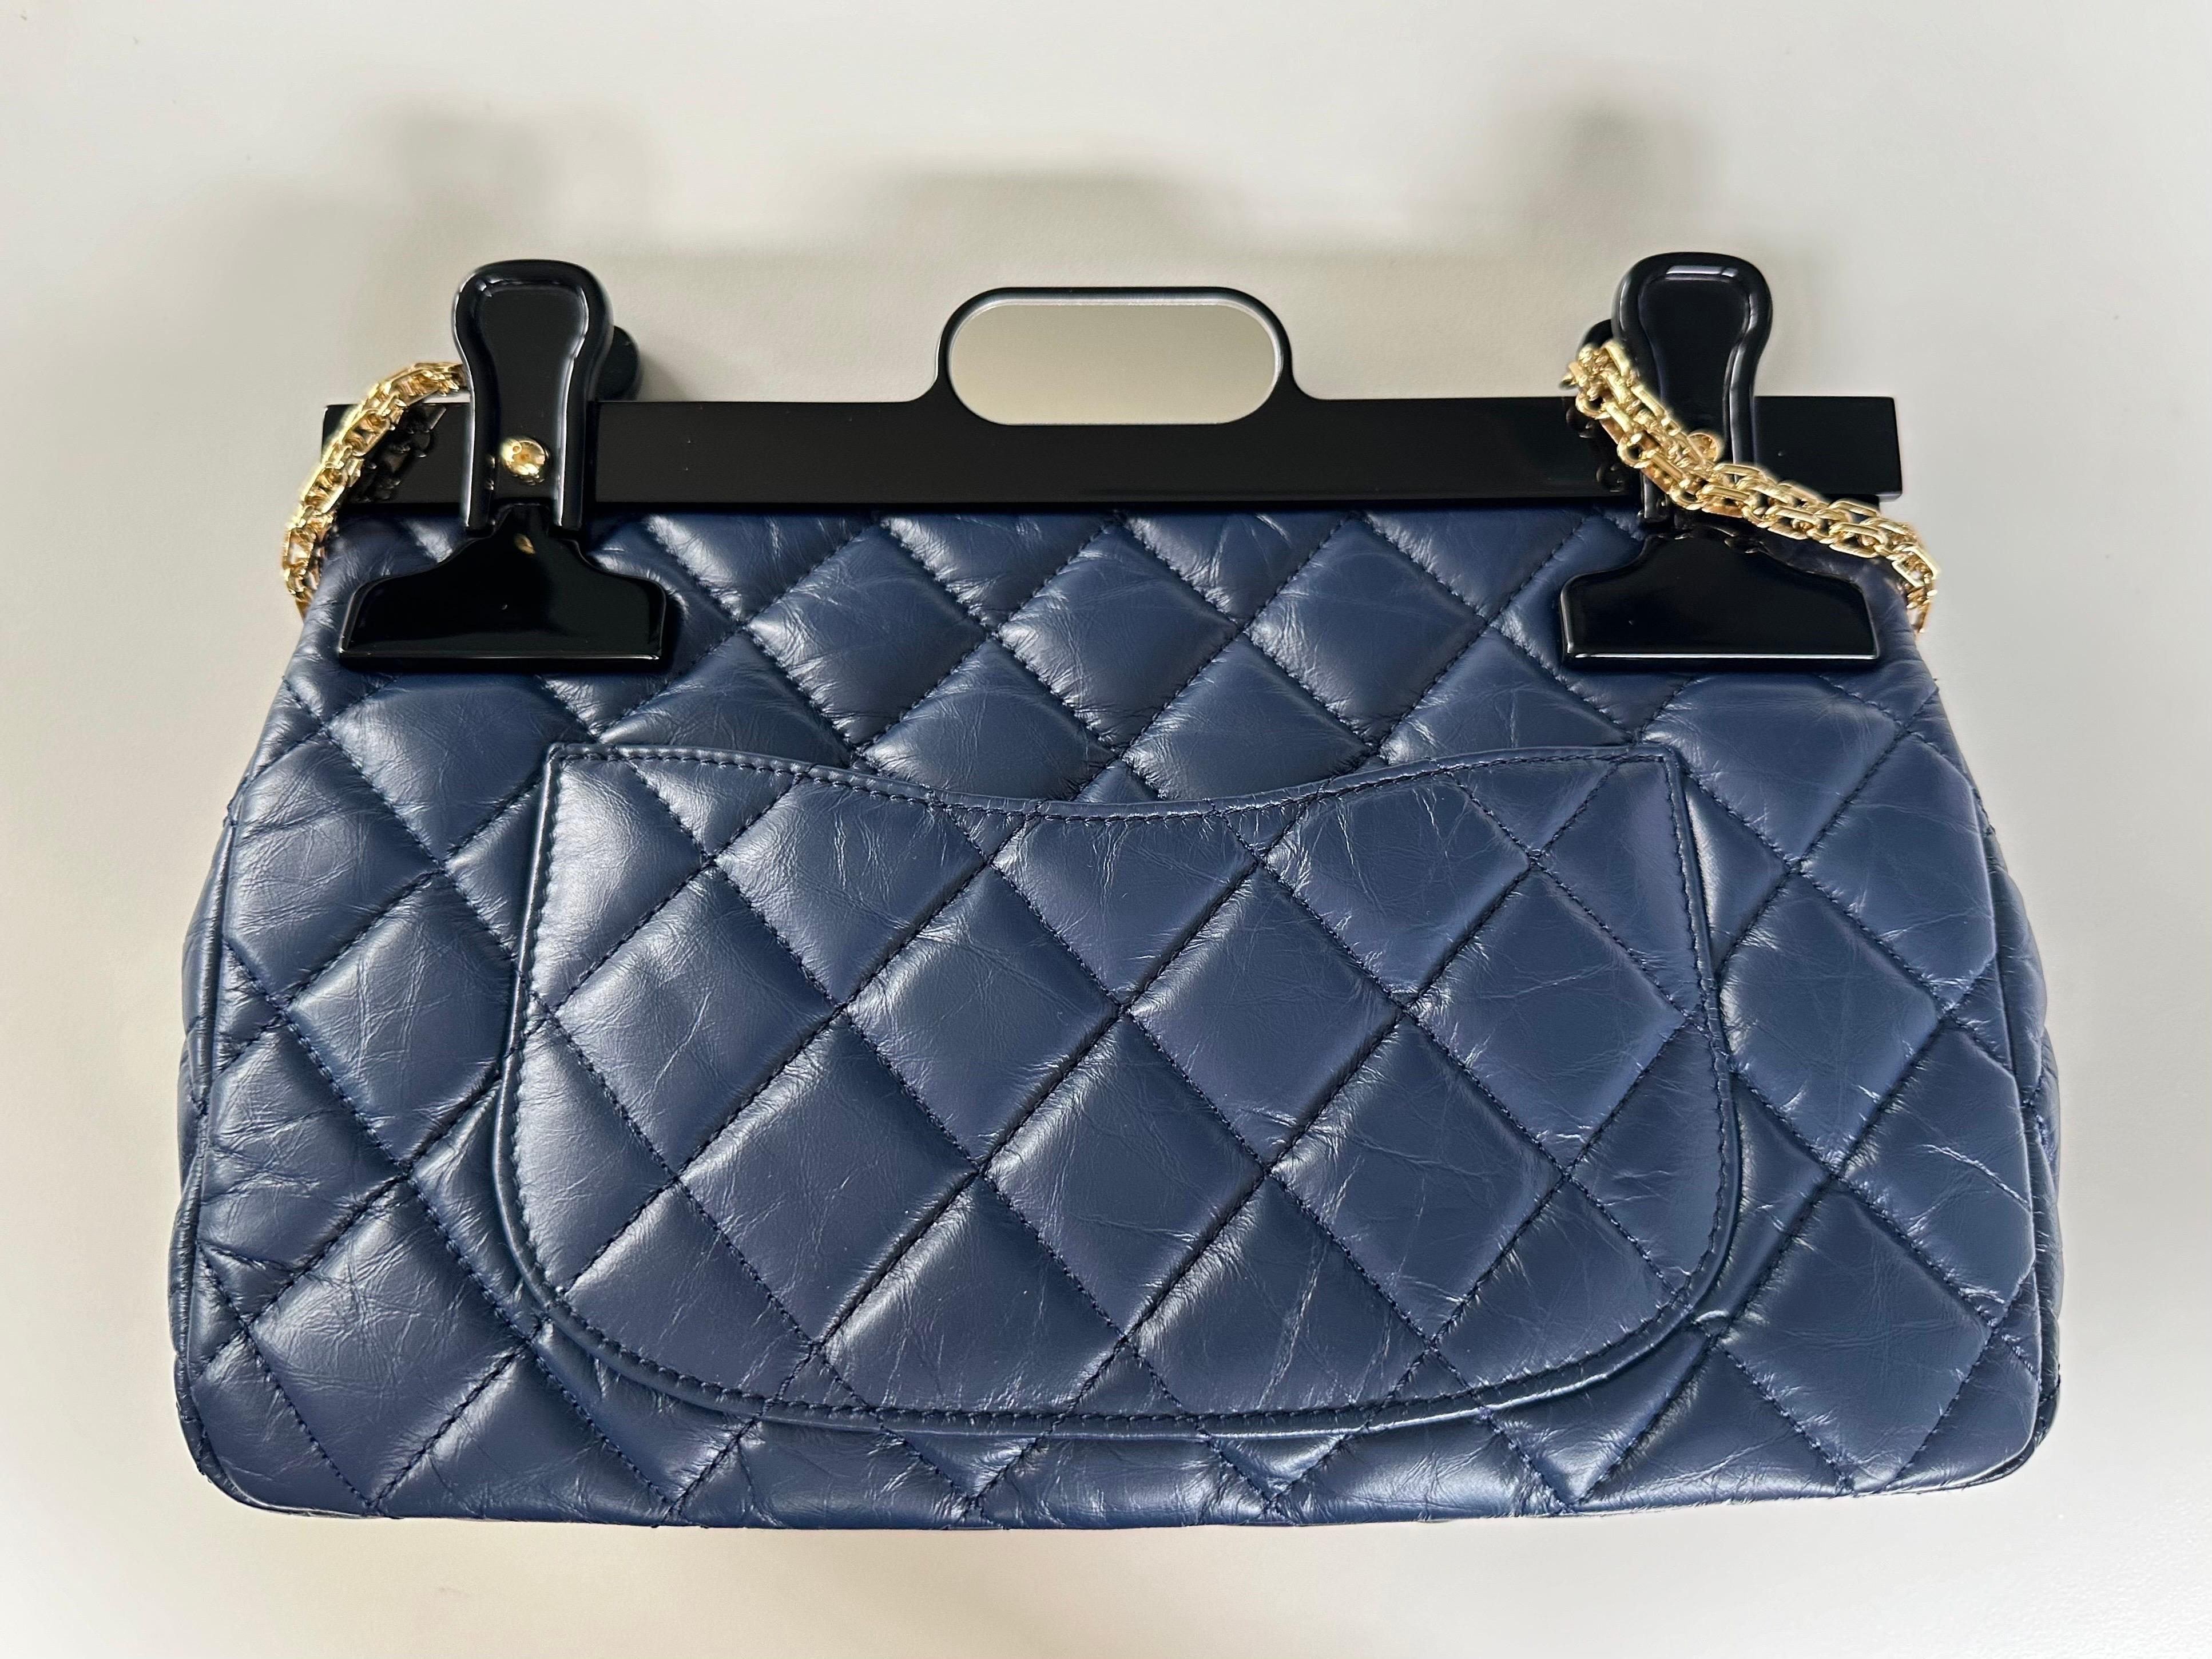 Chanel 2016 Limited Editiion 2.55 Reissue Rare Hanger Navy Blue Classic Flap Bag In New Condition For Sale In Miami, FL